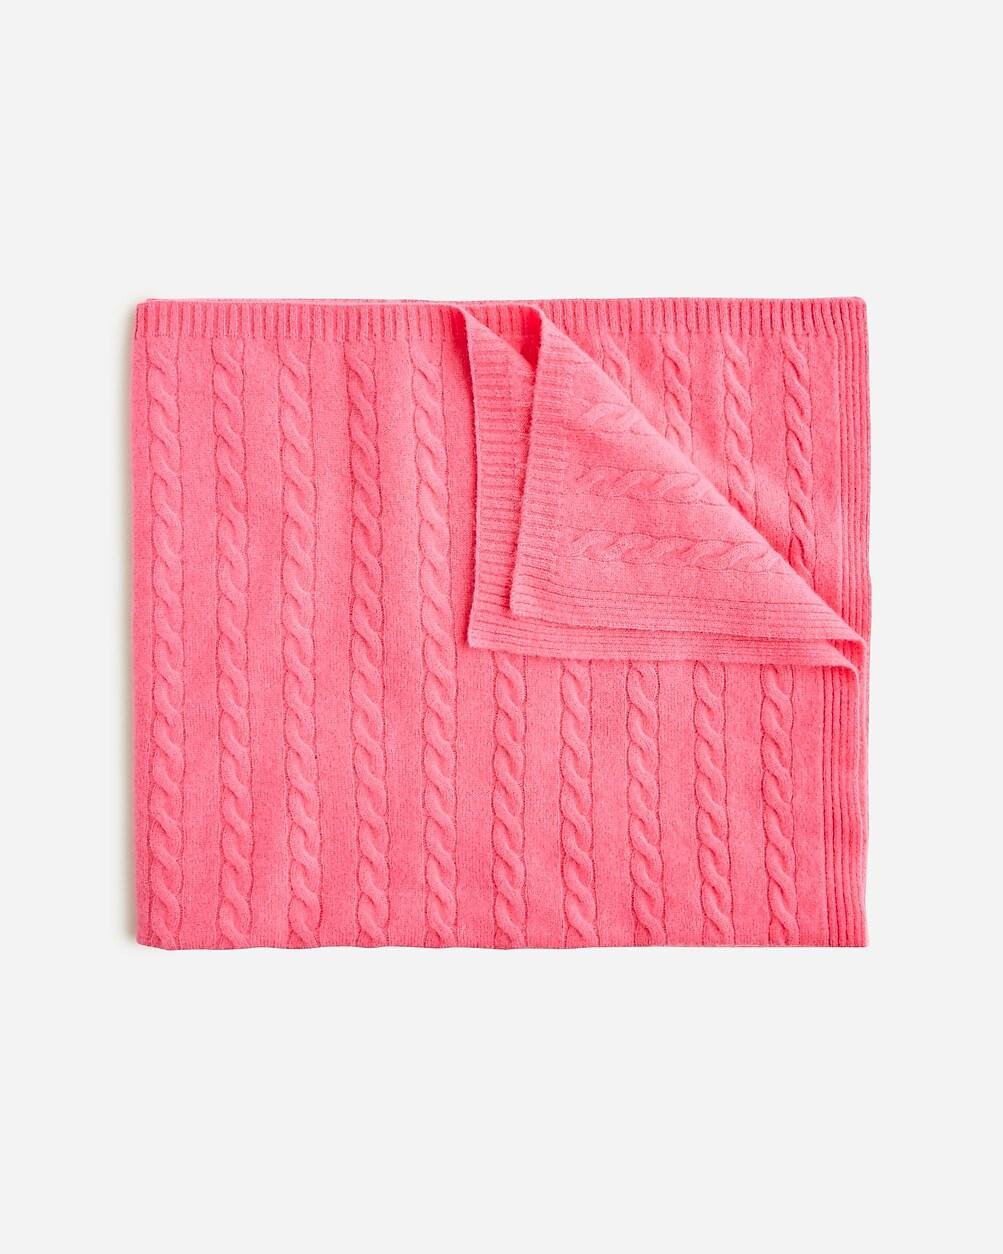 Limited-edition baby cashmere blanket by J.CREW